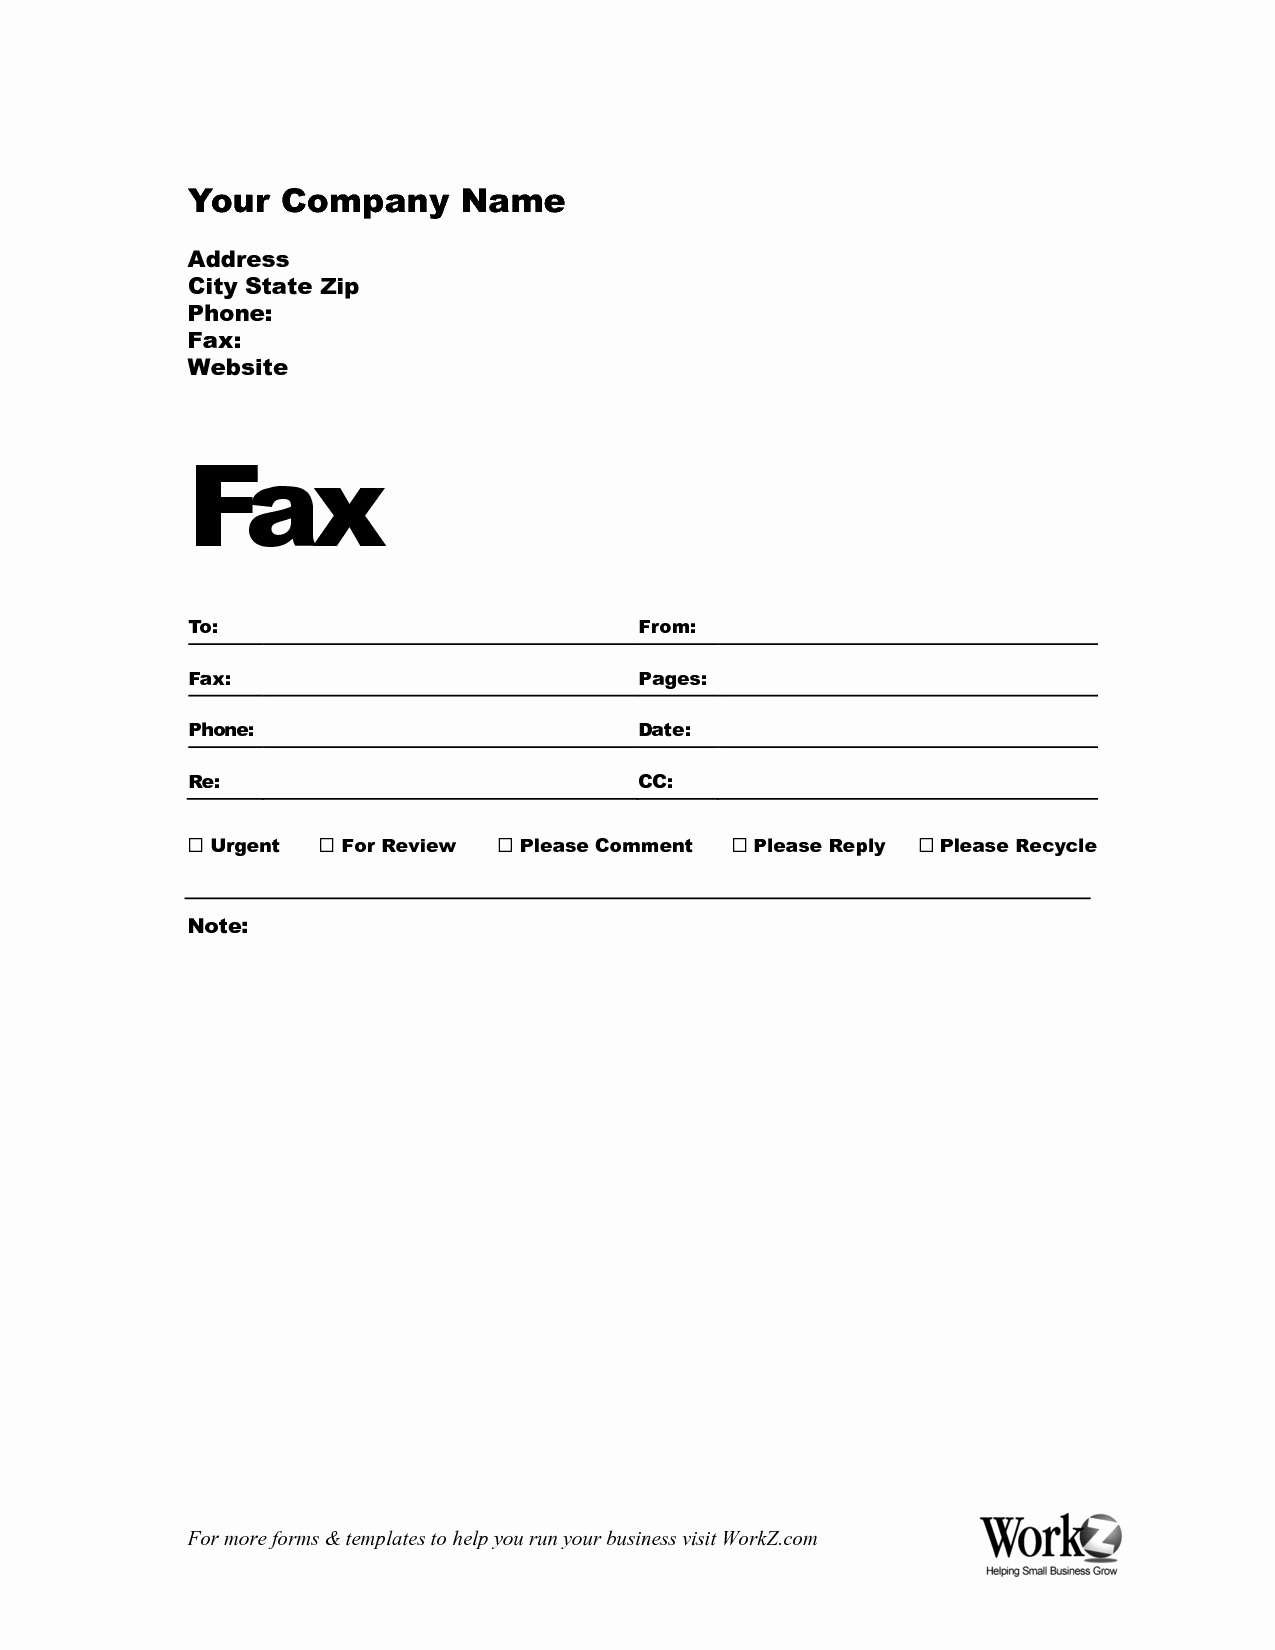 Free Fax Cover Letter Template Lovely Free Fax Cover Sheet Template Bamboodownunder